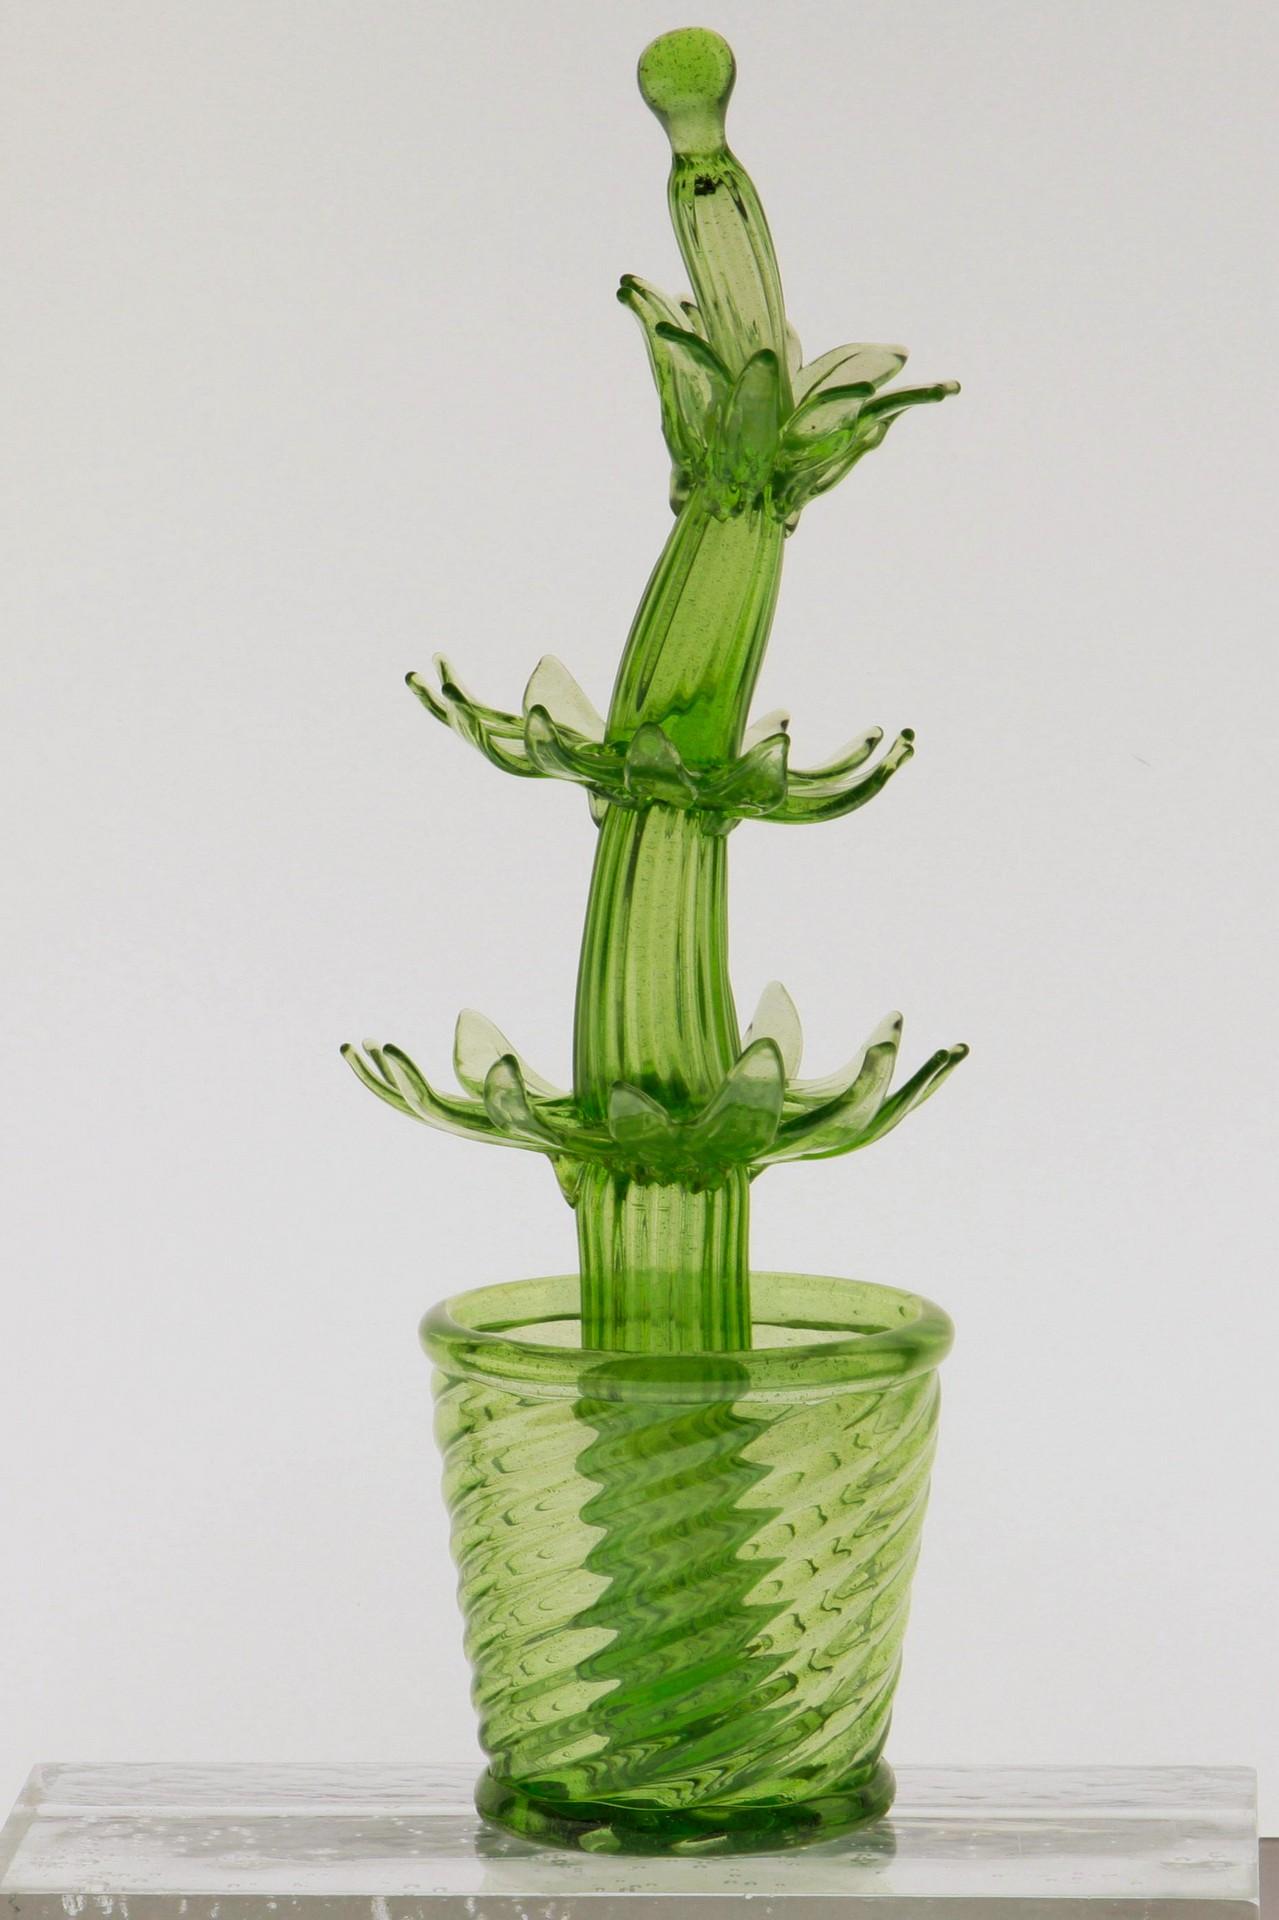 Elegant and decorative cactus plant in massiccio glass with staggered leaves. Green light puligoso.

Napoleone Martinuzzi designed a serie of these in the 1930s and produced under Venini, Zecchin, Seguso, Pauly and VAMSA Furnace. Young Barbini was